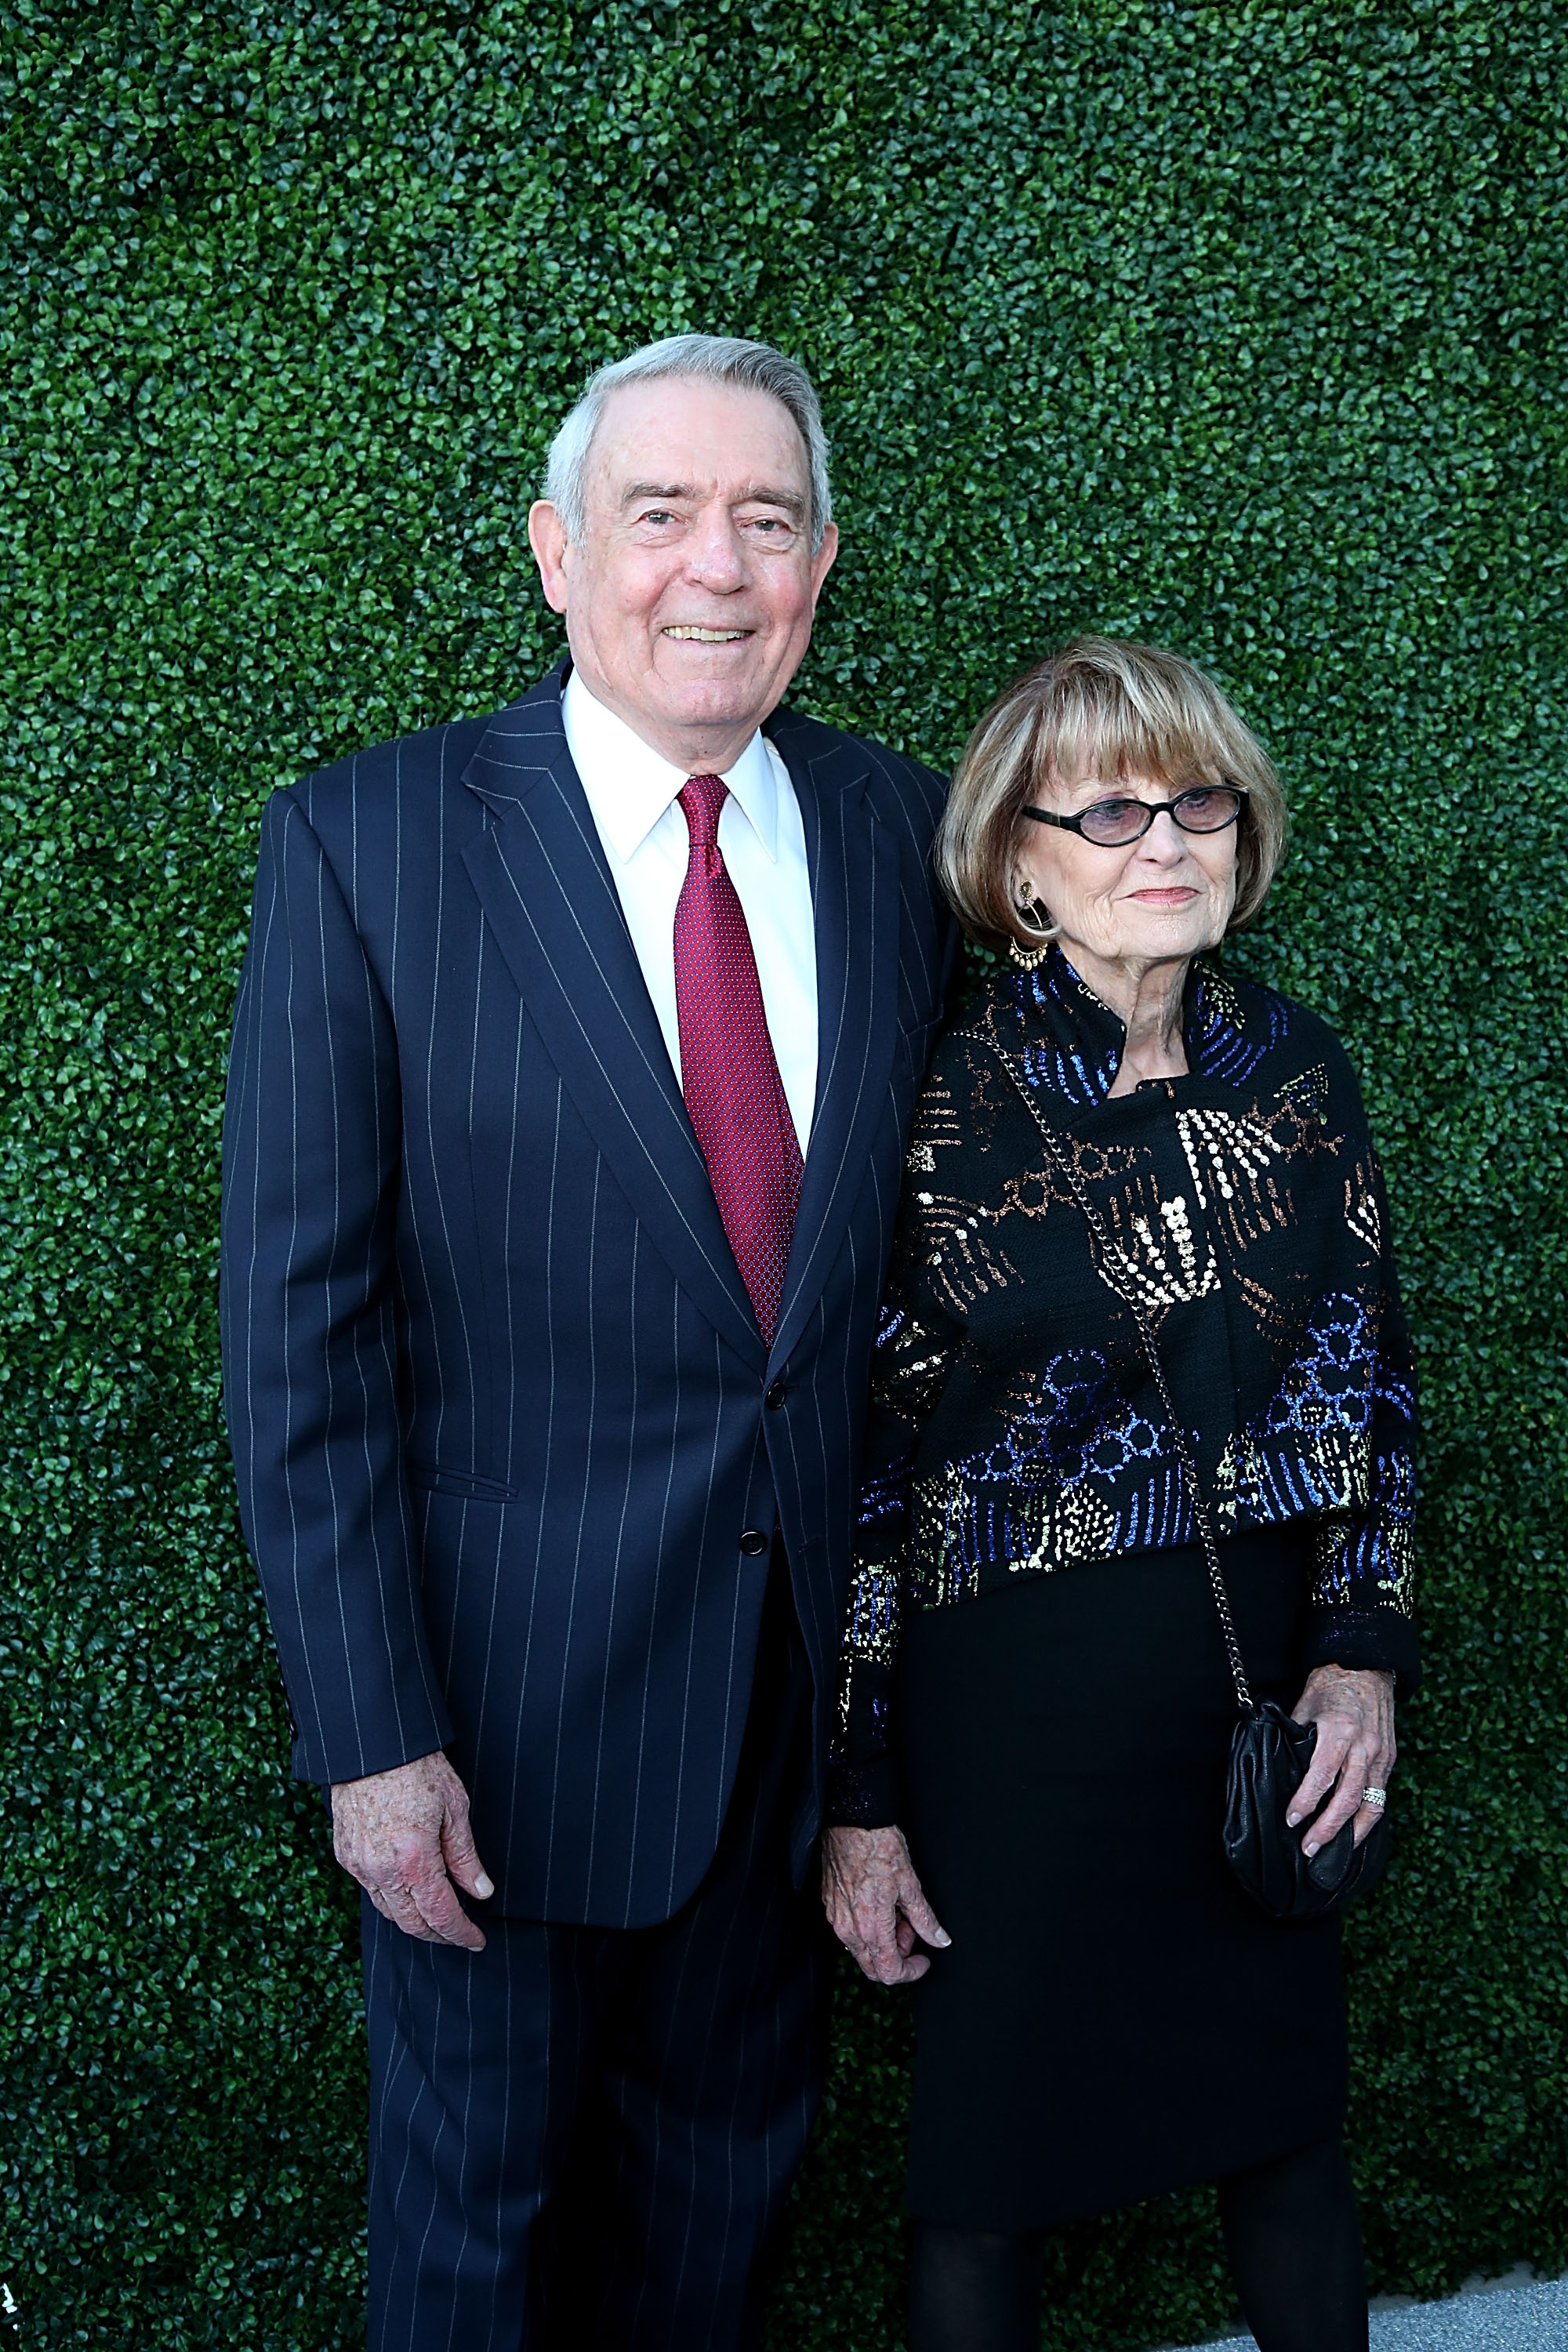 Dan Rather and his wife Jean in Texas in 2015 | Source: Getty Images